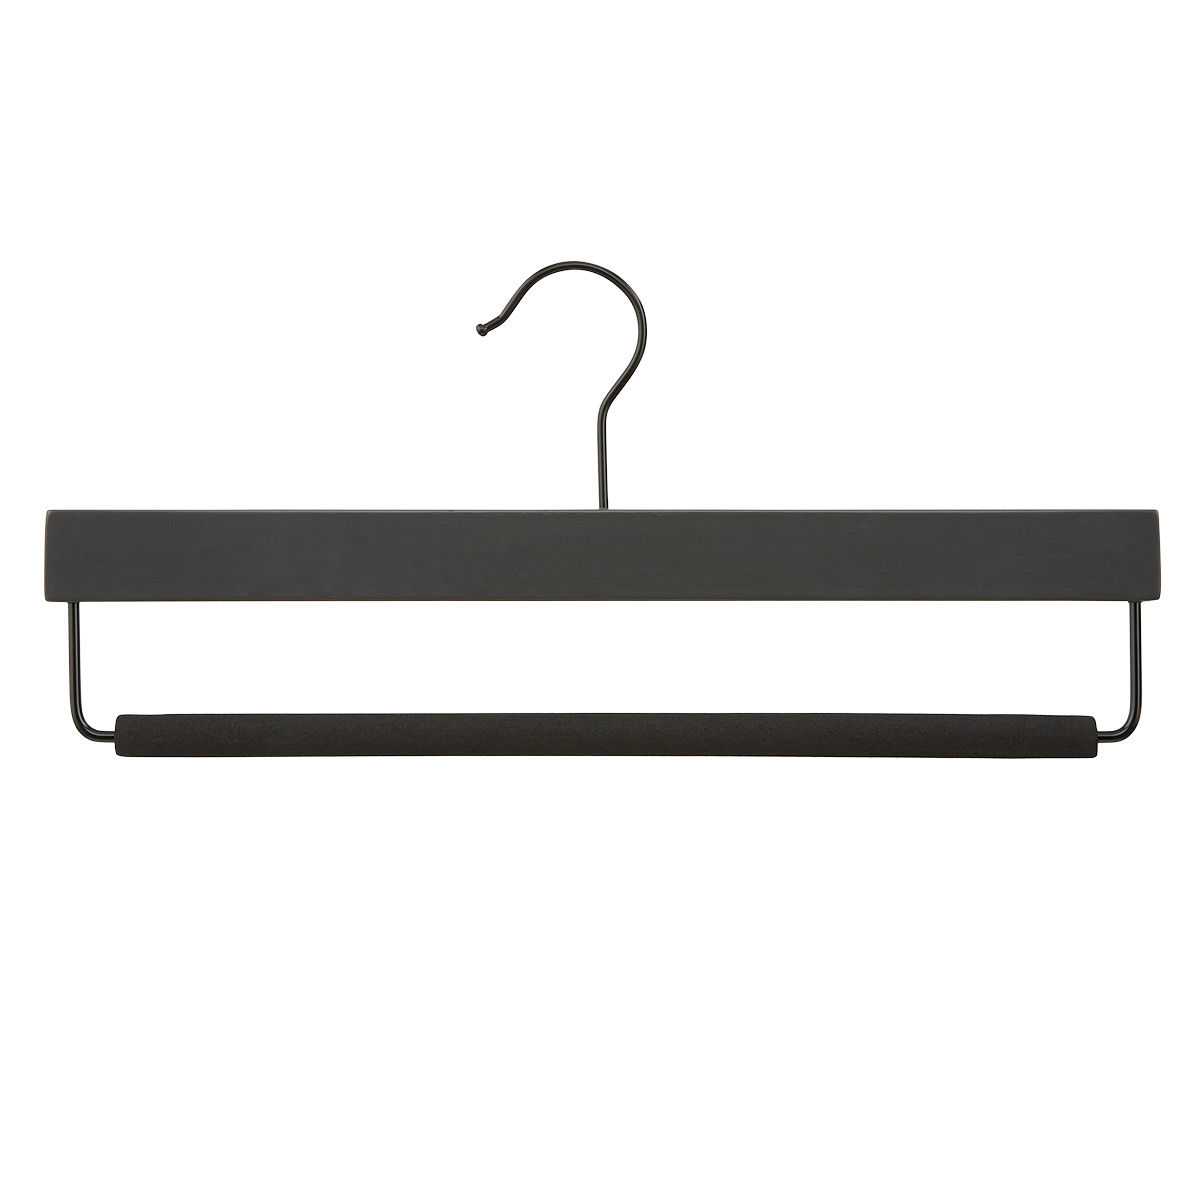 Wooden Trouser Hangers with Silver Clips Black  Clothes hangers